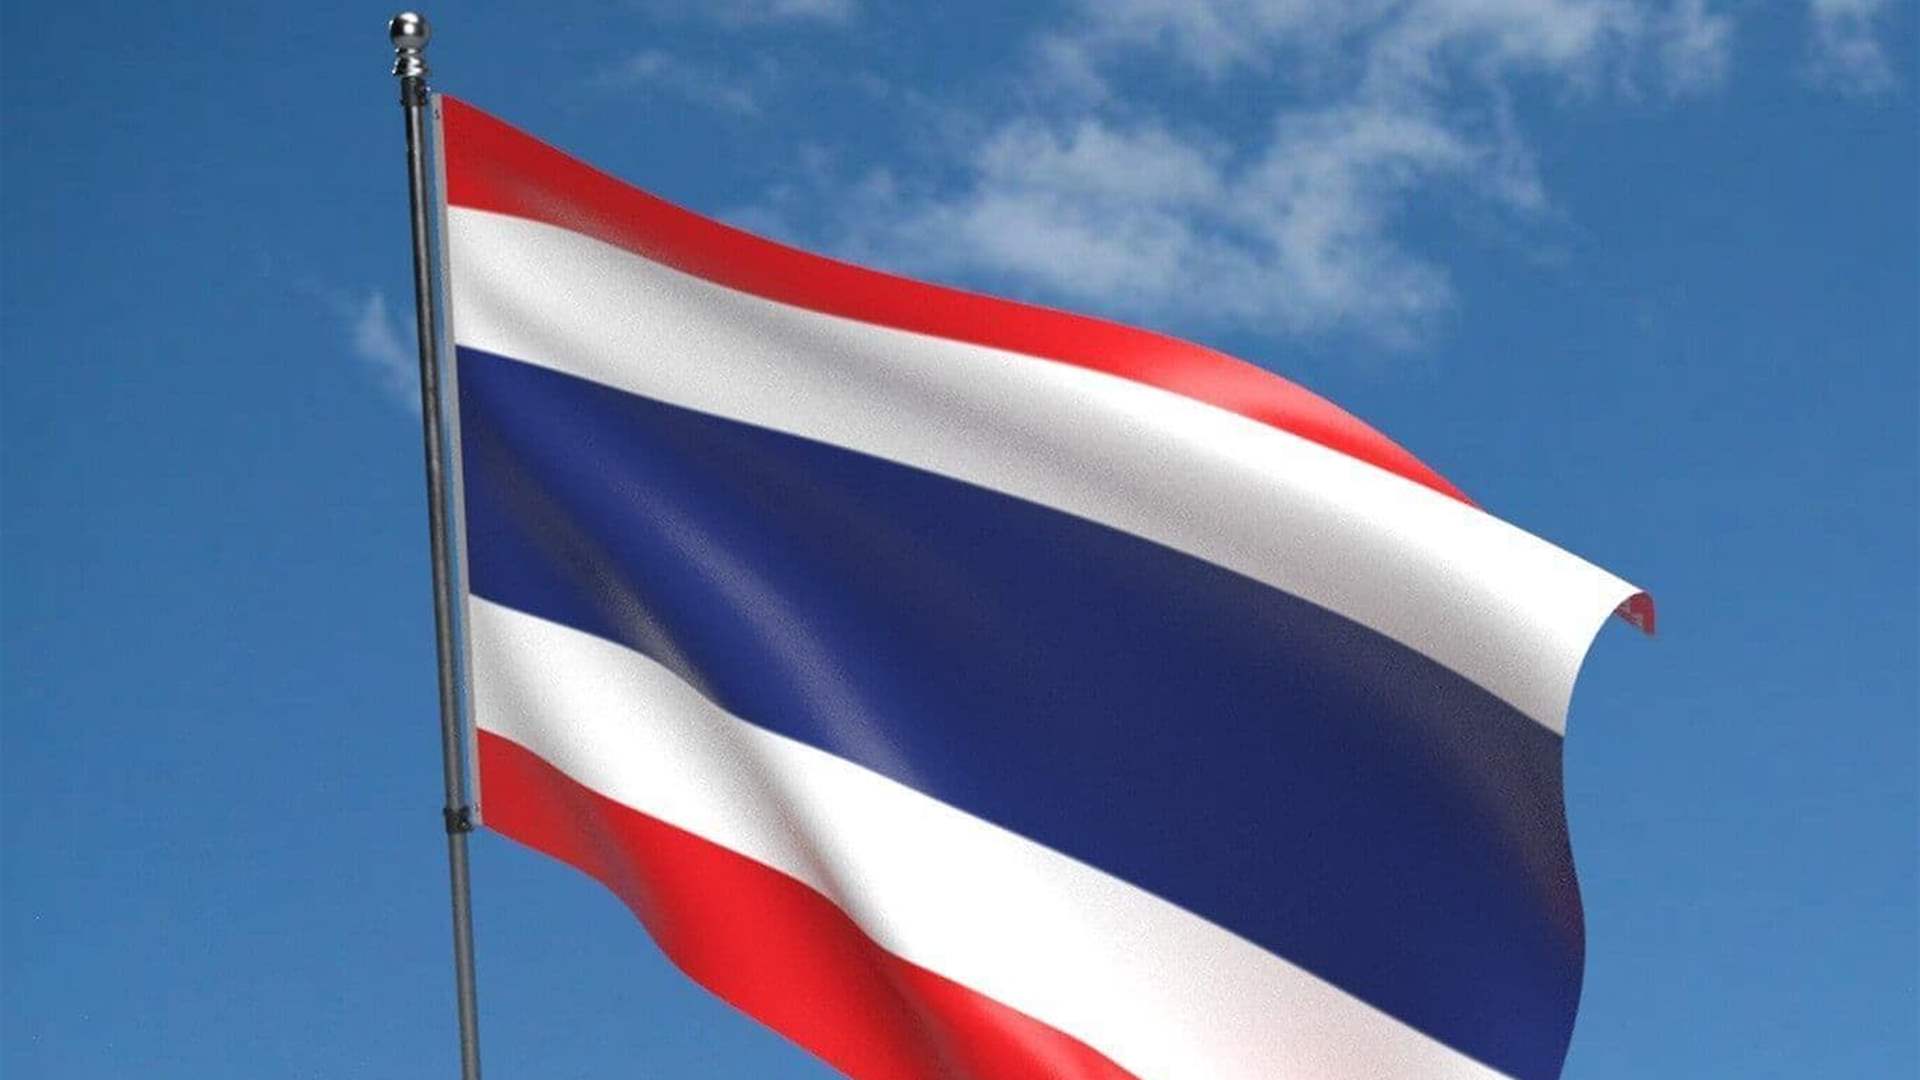 Thai hostages are subject of discussion between Thai Foreign Minister and his Iranian counterpart